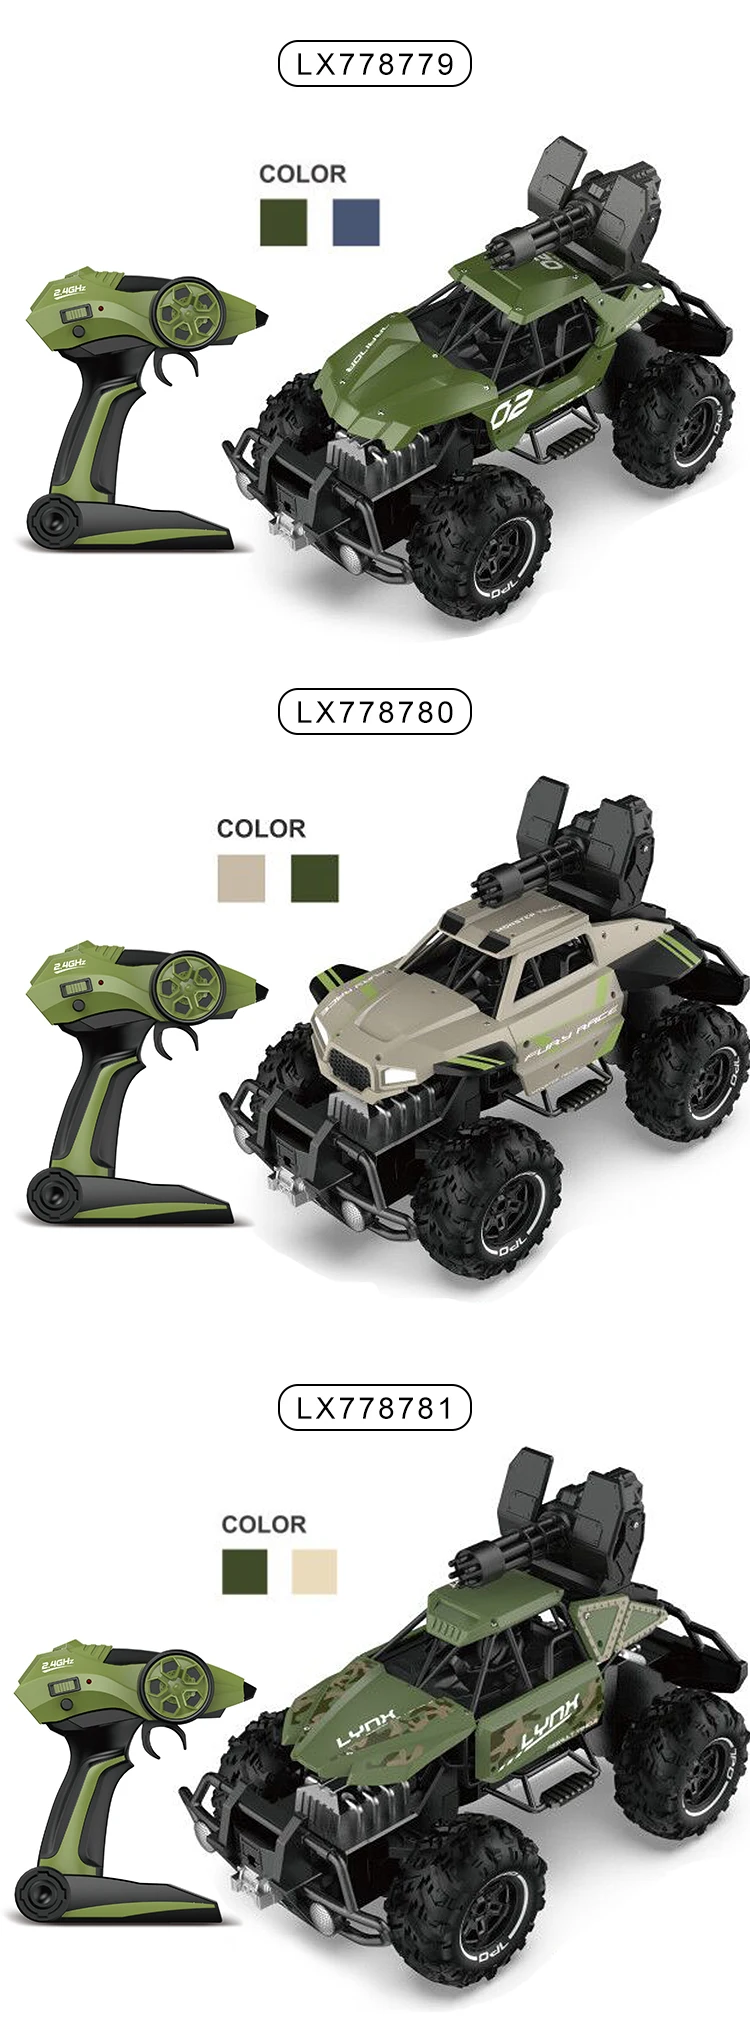 1:12 4WD RC Car 2.4G Radio Control RC Cars Toys High Speed Trucks Off-Road Trucks Toys RC Buggy For Children